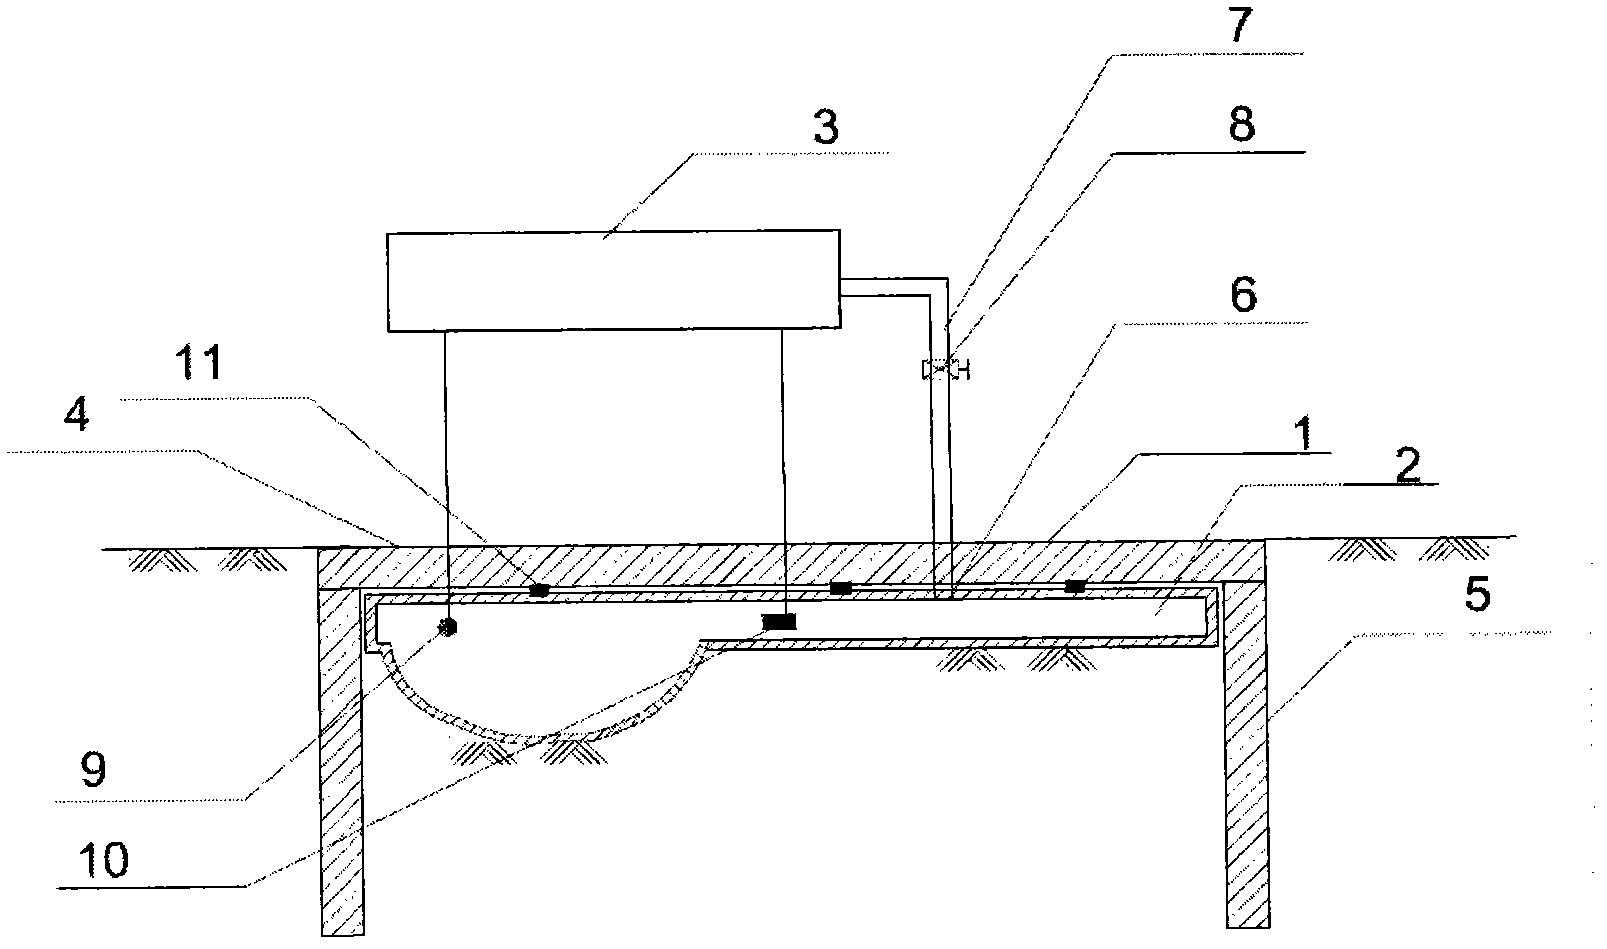 Foundation system capable of controlling settlement